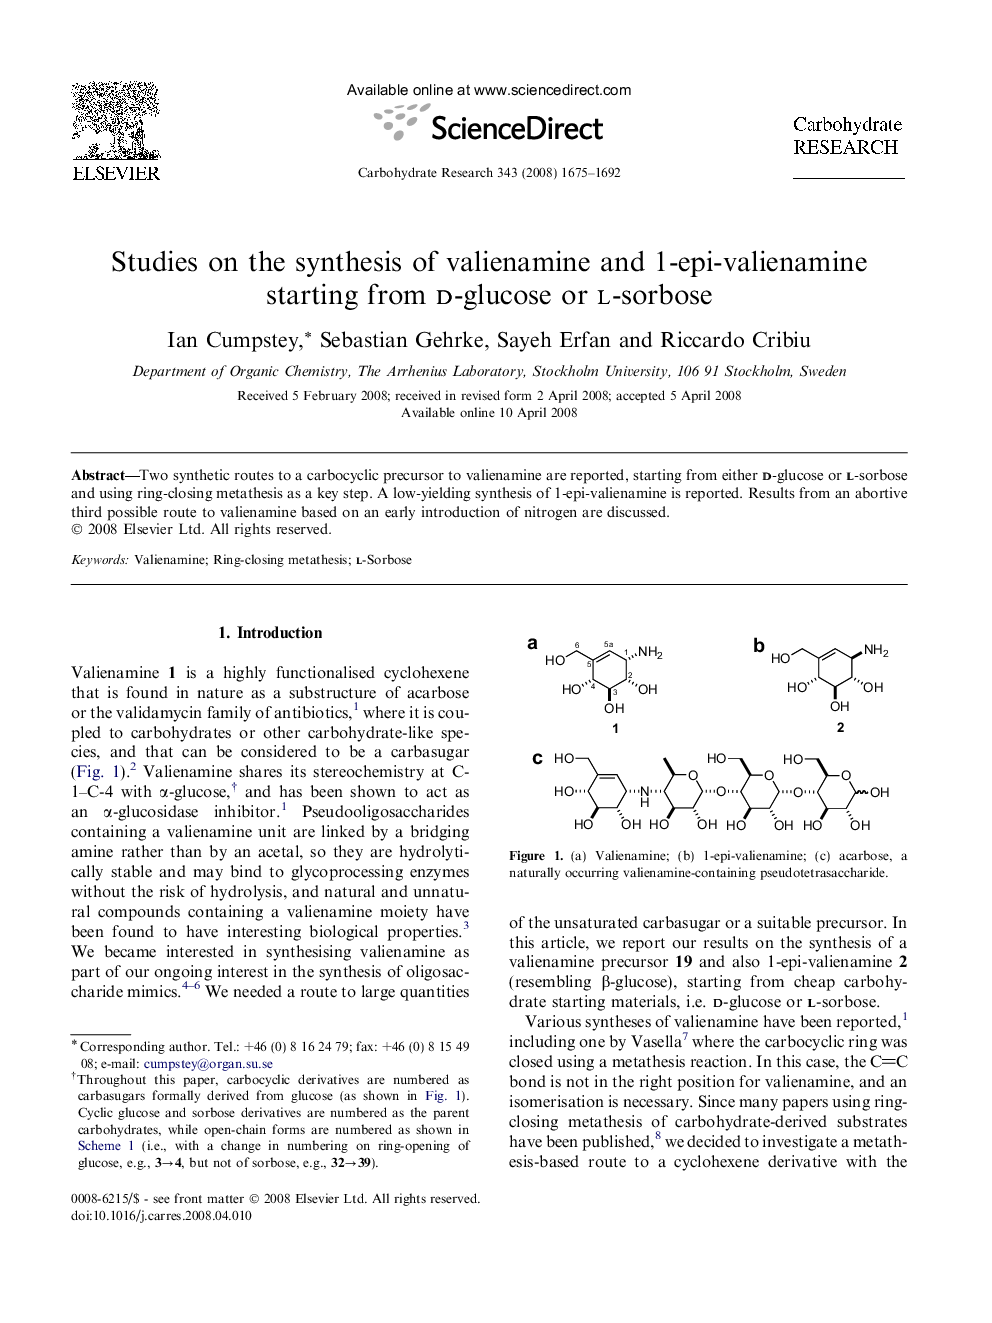 Studies on the synthesis of valienamine and 1-epi-valienamine starting from d-glucose or l-sorbose